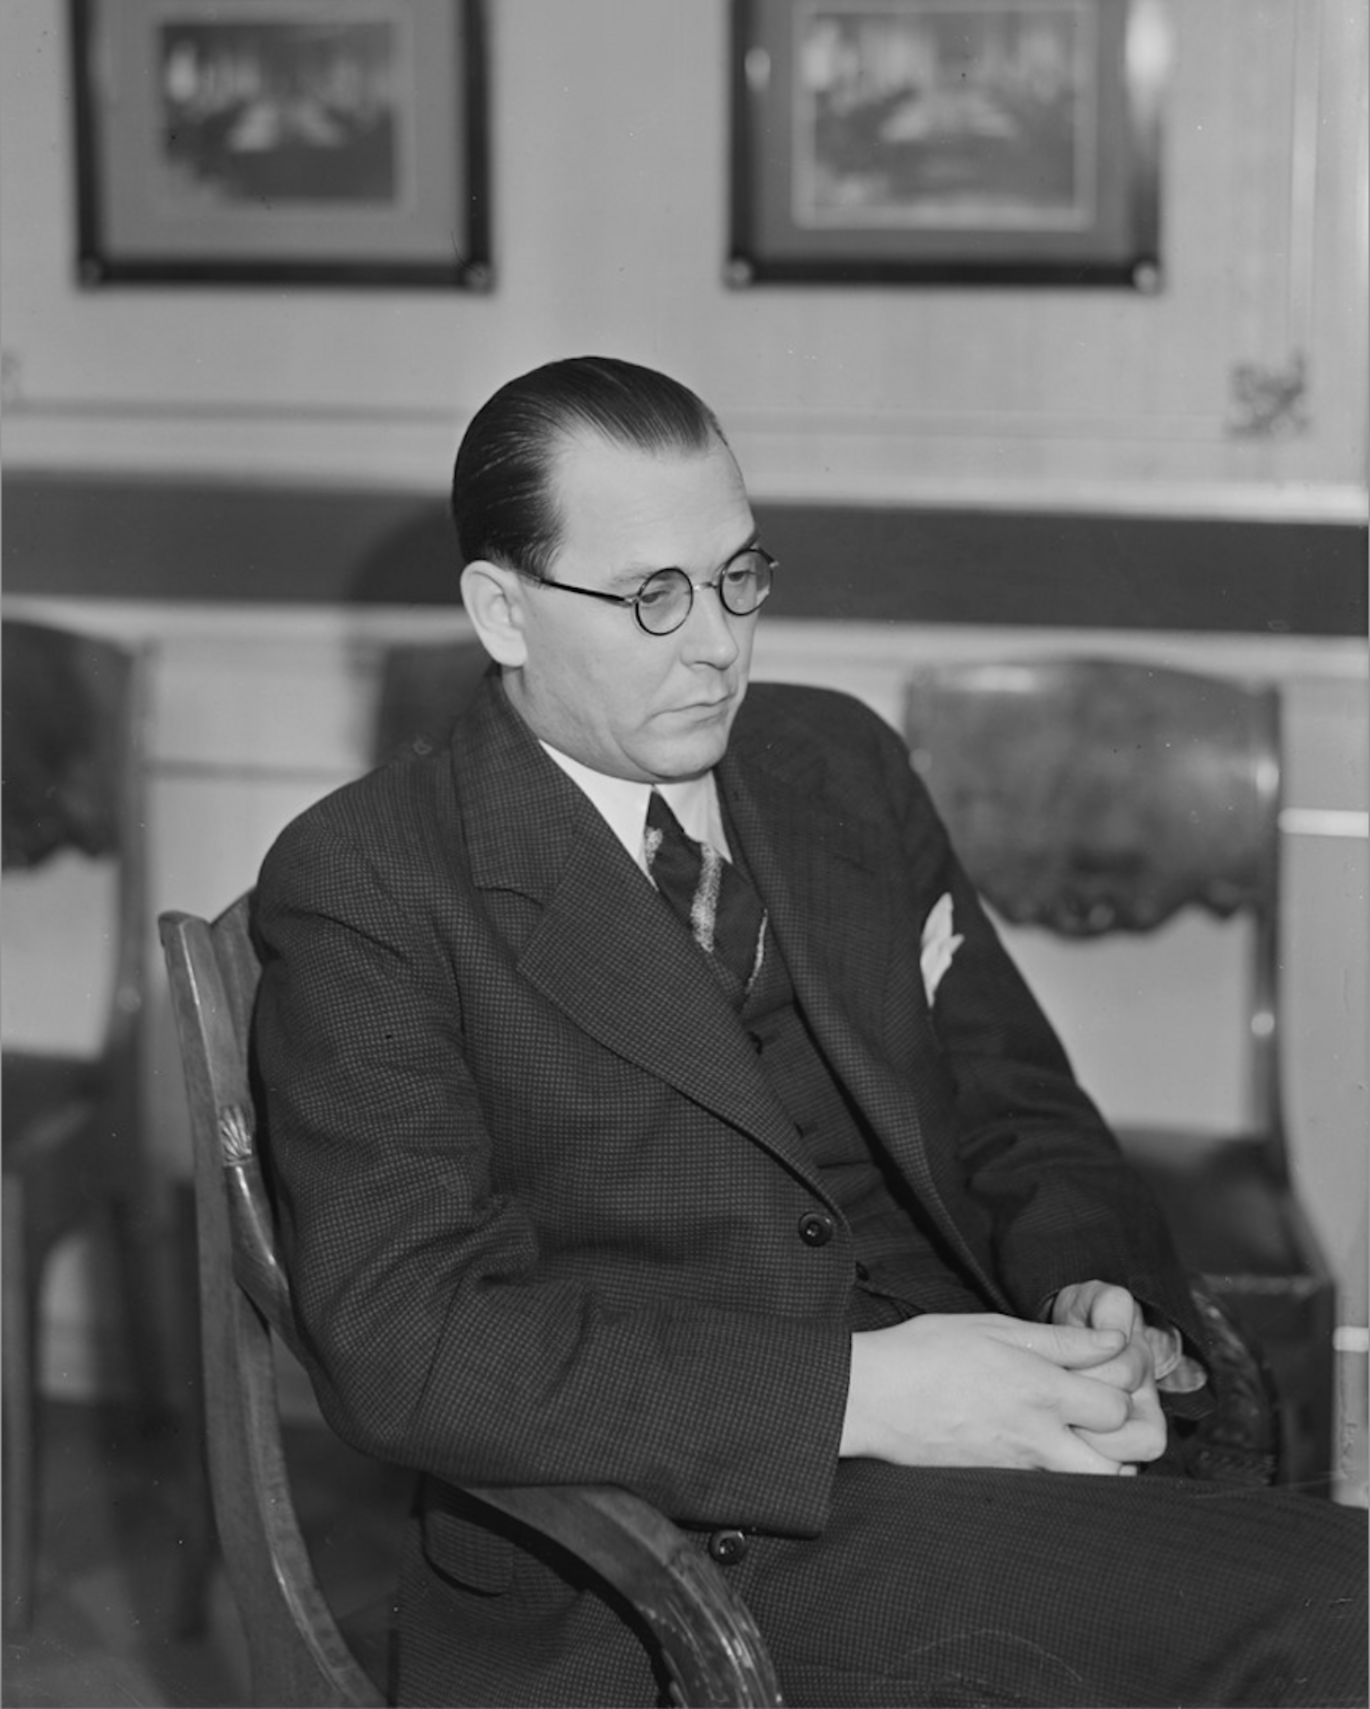 Black and white portrait of a man with glasses sitting in a chair in a suit